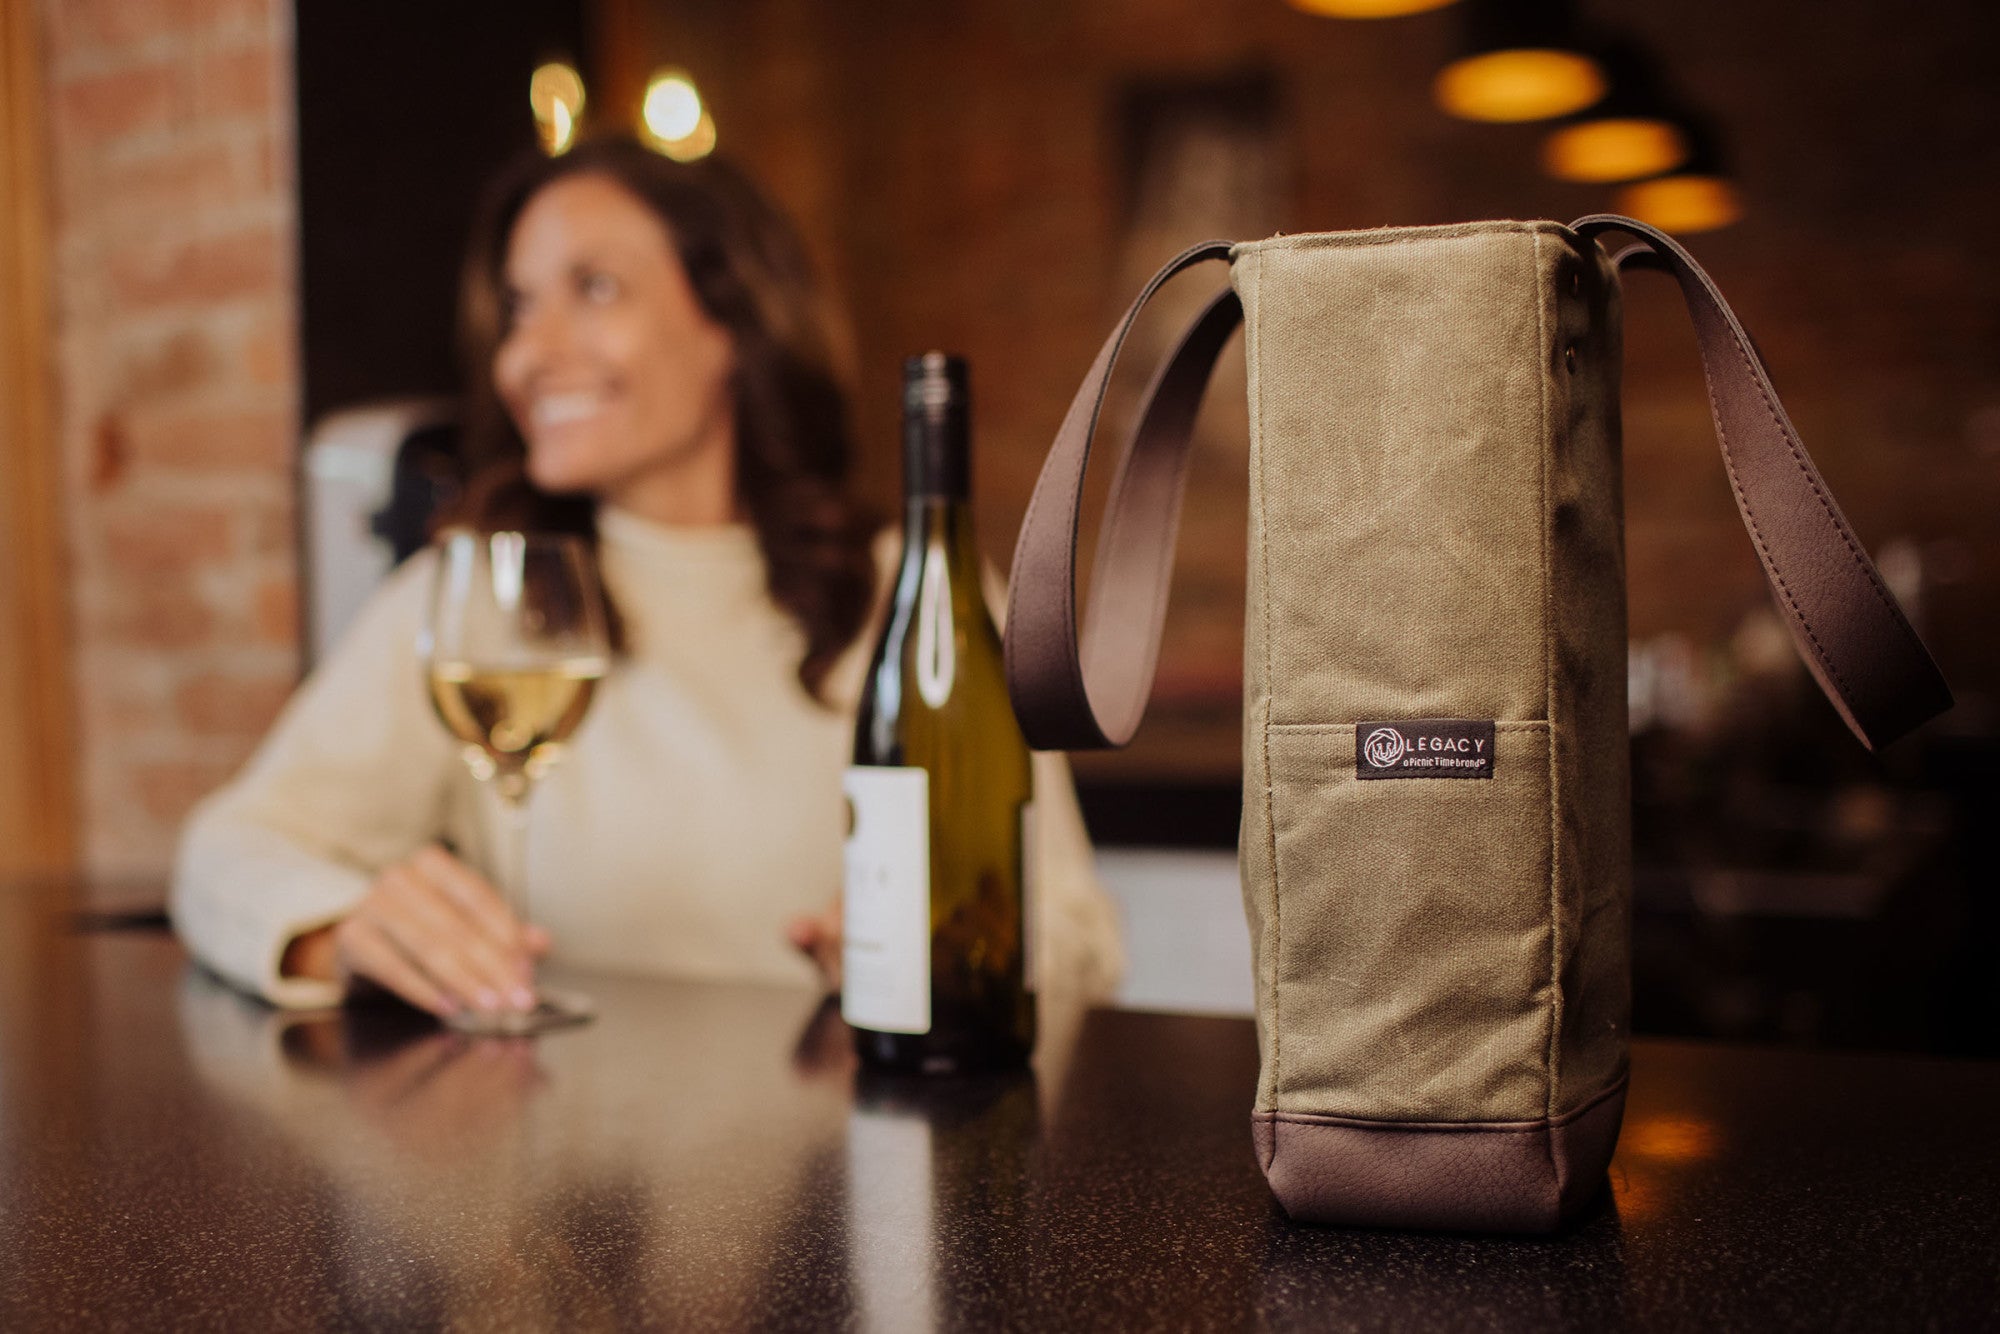 Amazon.com: tilvini Genuine Leather Wine Tote Bag With Insulated Wine Cooler  Compartment. Christmas Wine Gift For Women. Wine Purse Travel Accessories  For Wine Lovers. Beach Cooler Bag Wine Bottle Carrier Byob :